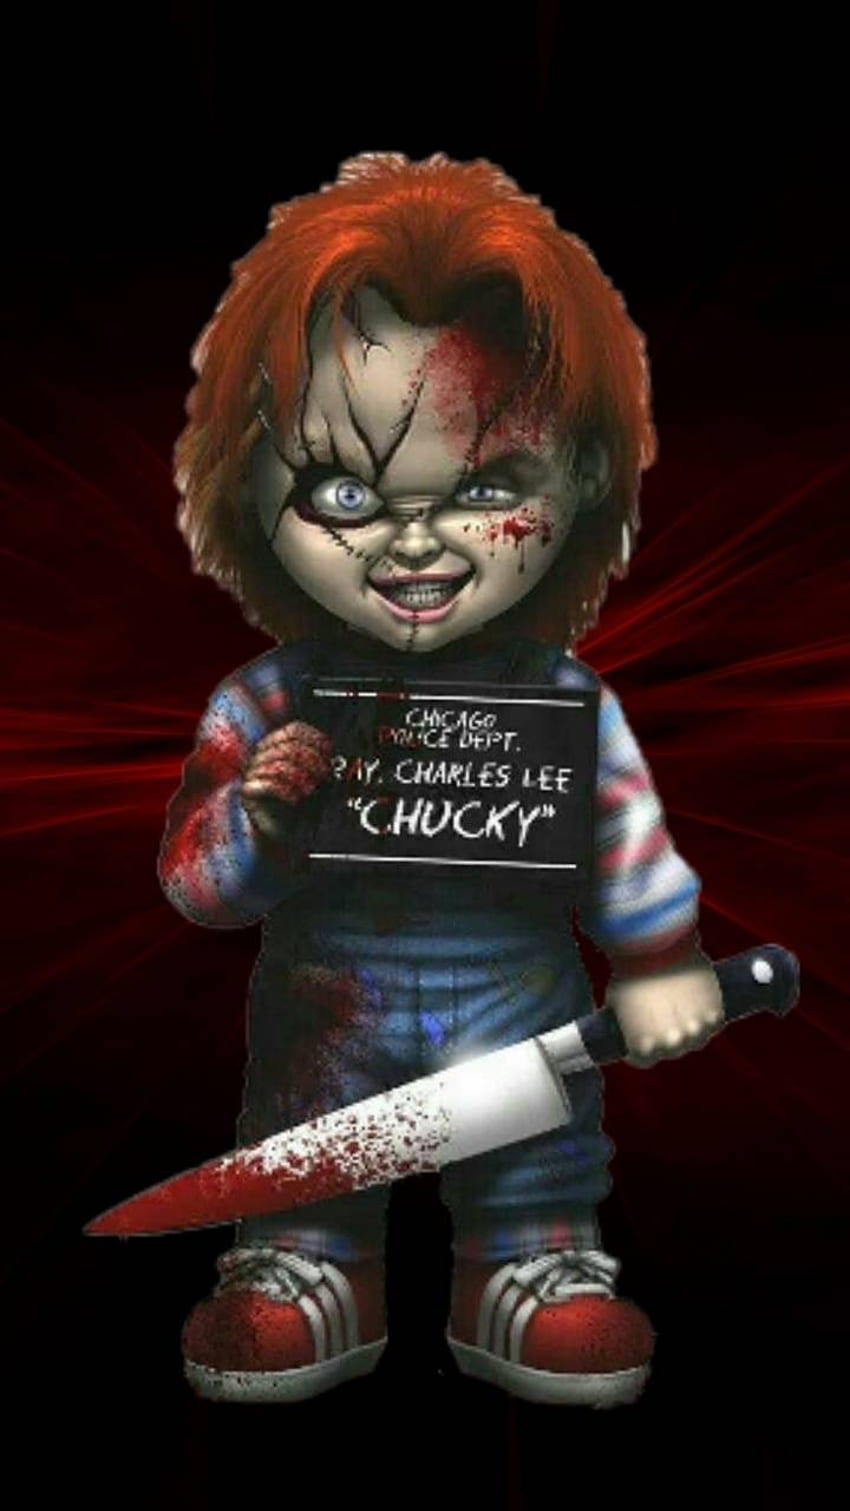 Share more than 63 cool chucky wallpaper latest - in.cdgdbentre